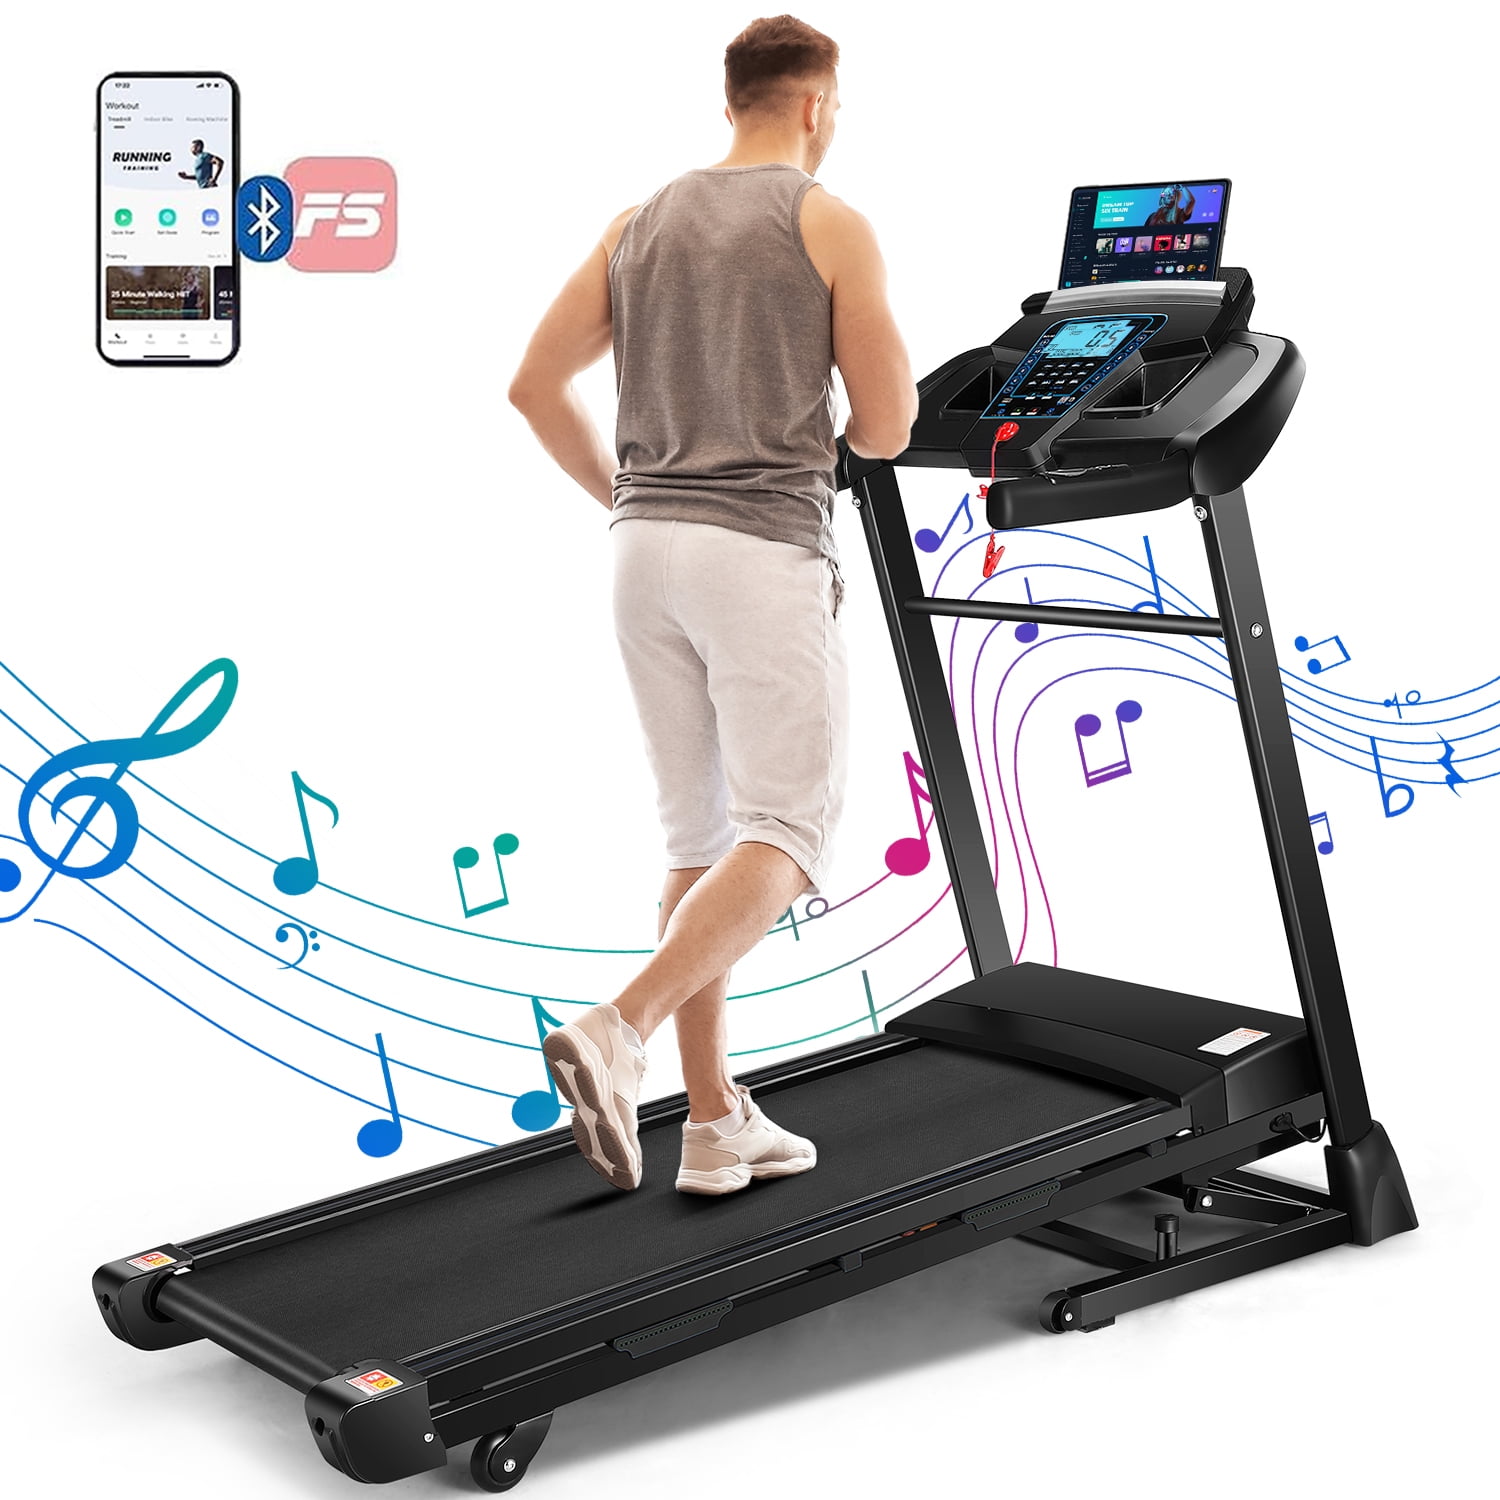 Treadmill 300 lb Capacity, 3.25 HP Automatic Incline Treadmill with APP &  Bluetooth Audio Speakers, Electric Folding Treadmills for Home Office Gym,  Indoor Walking Running Exercise Machine 